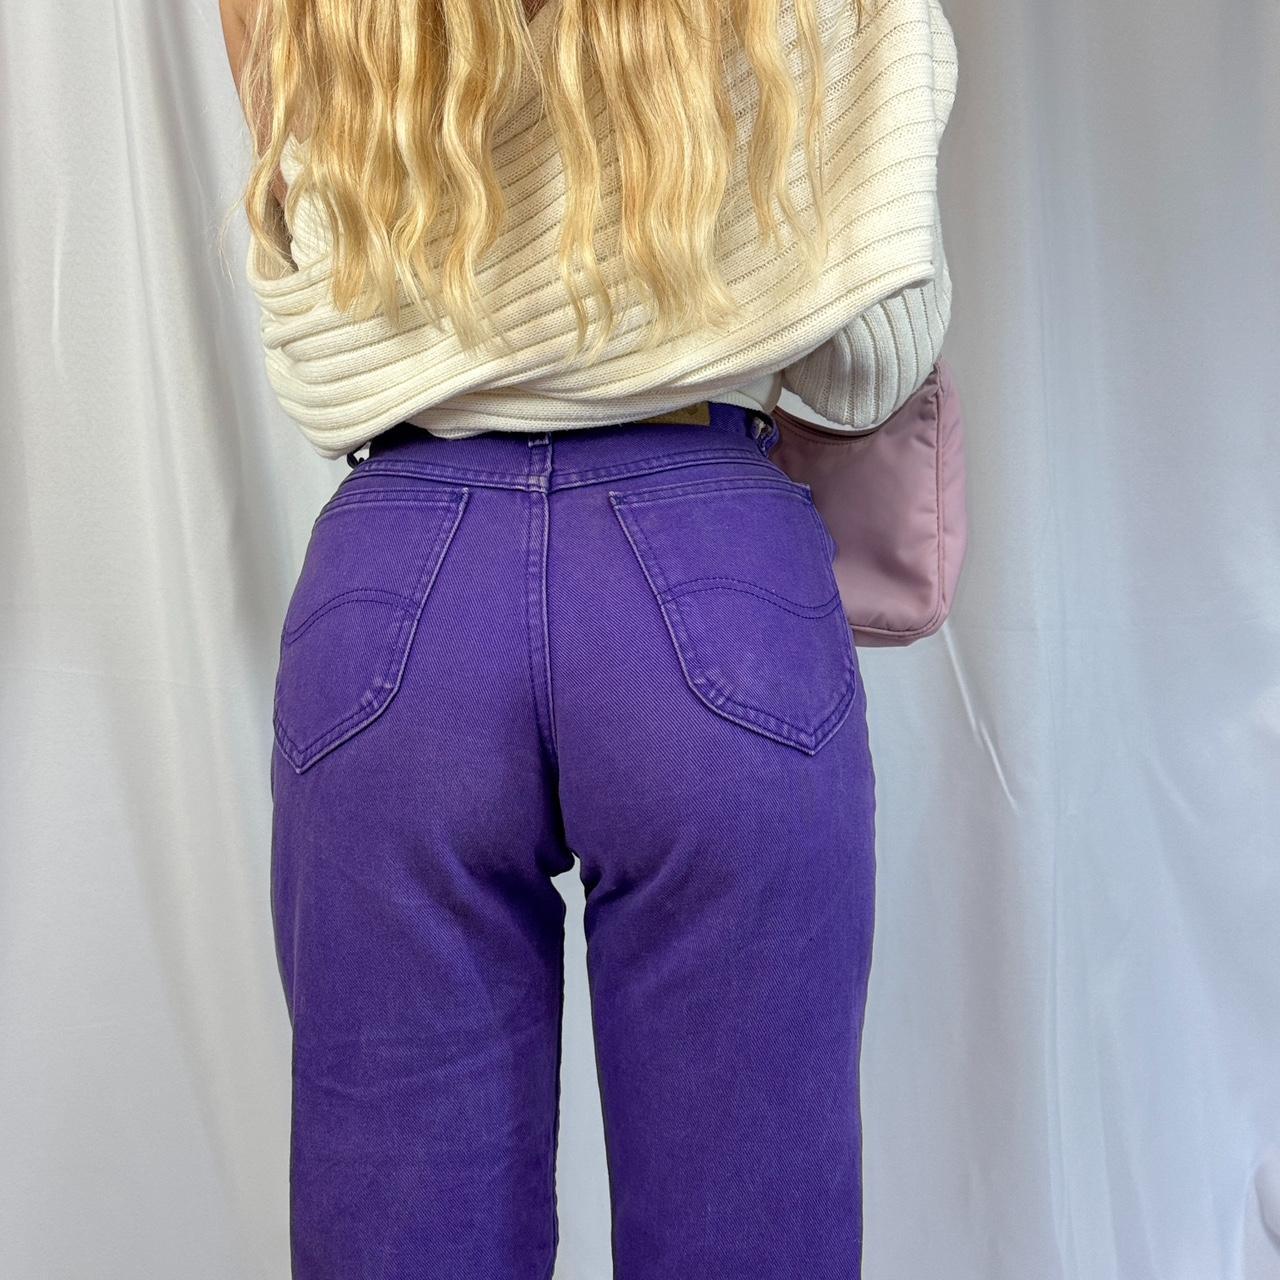 Pink/purple jeans Size small or medium (no tags) - Depop